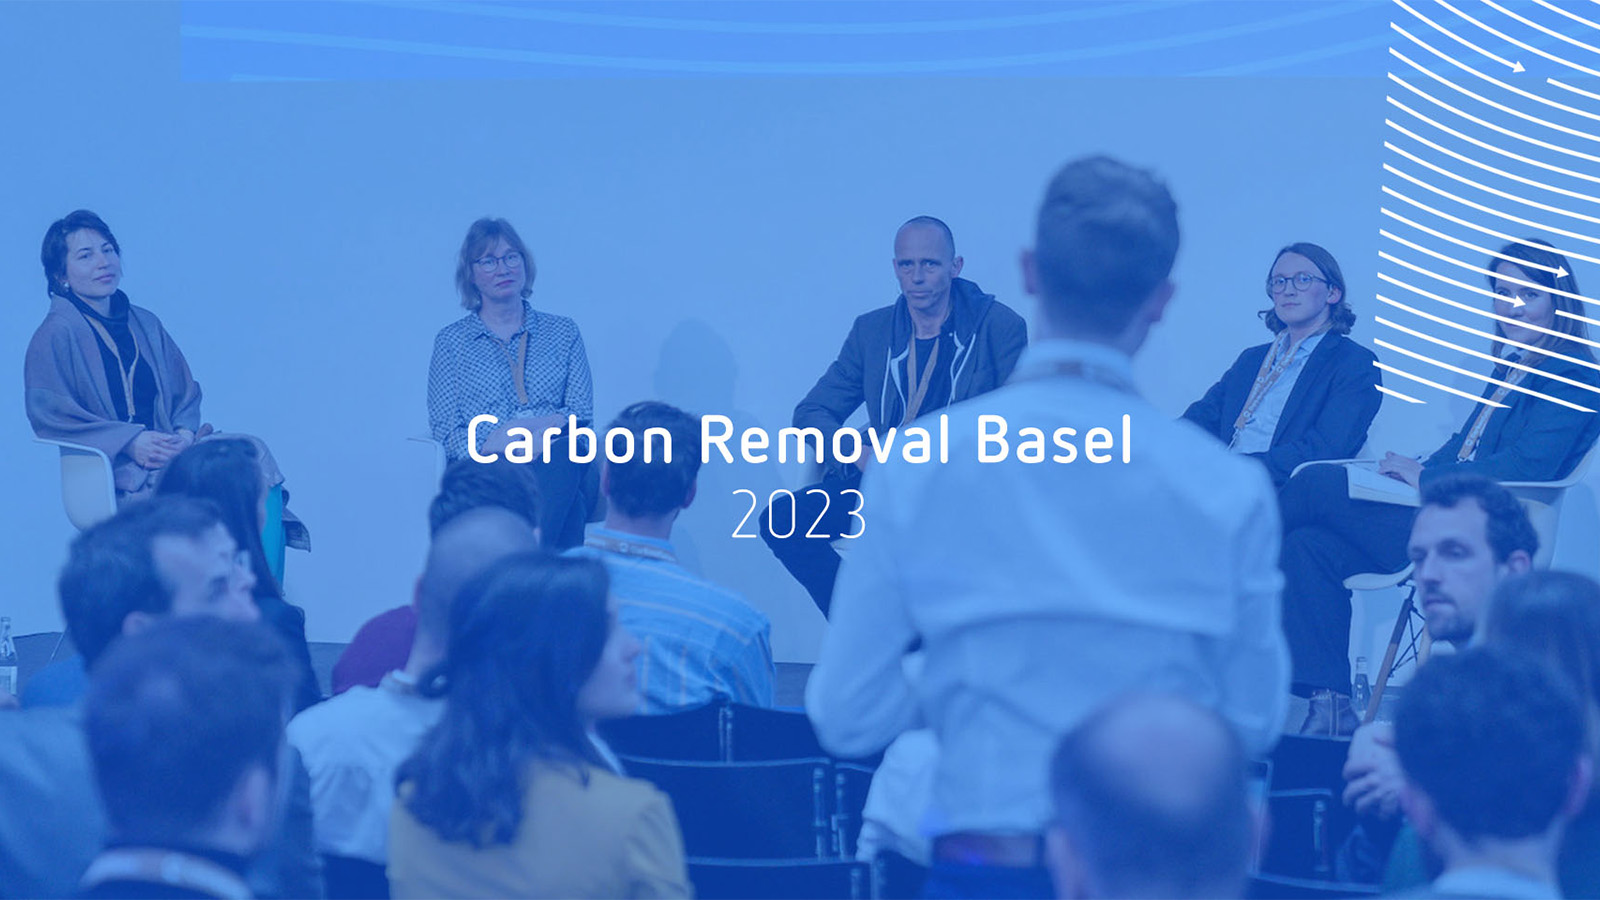 Carbon Removal Basel 2023